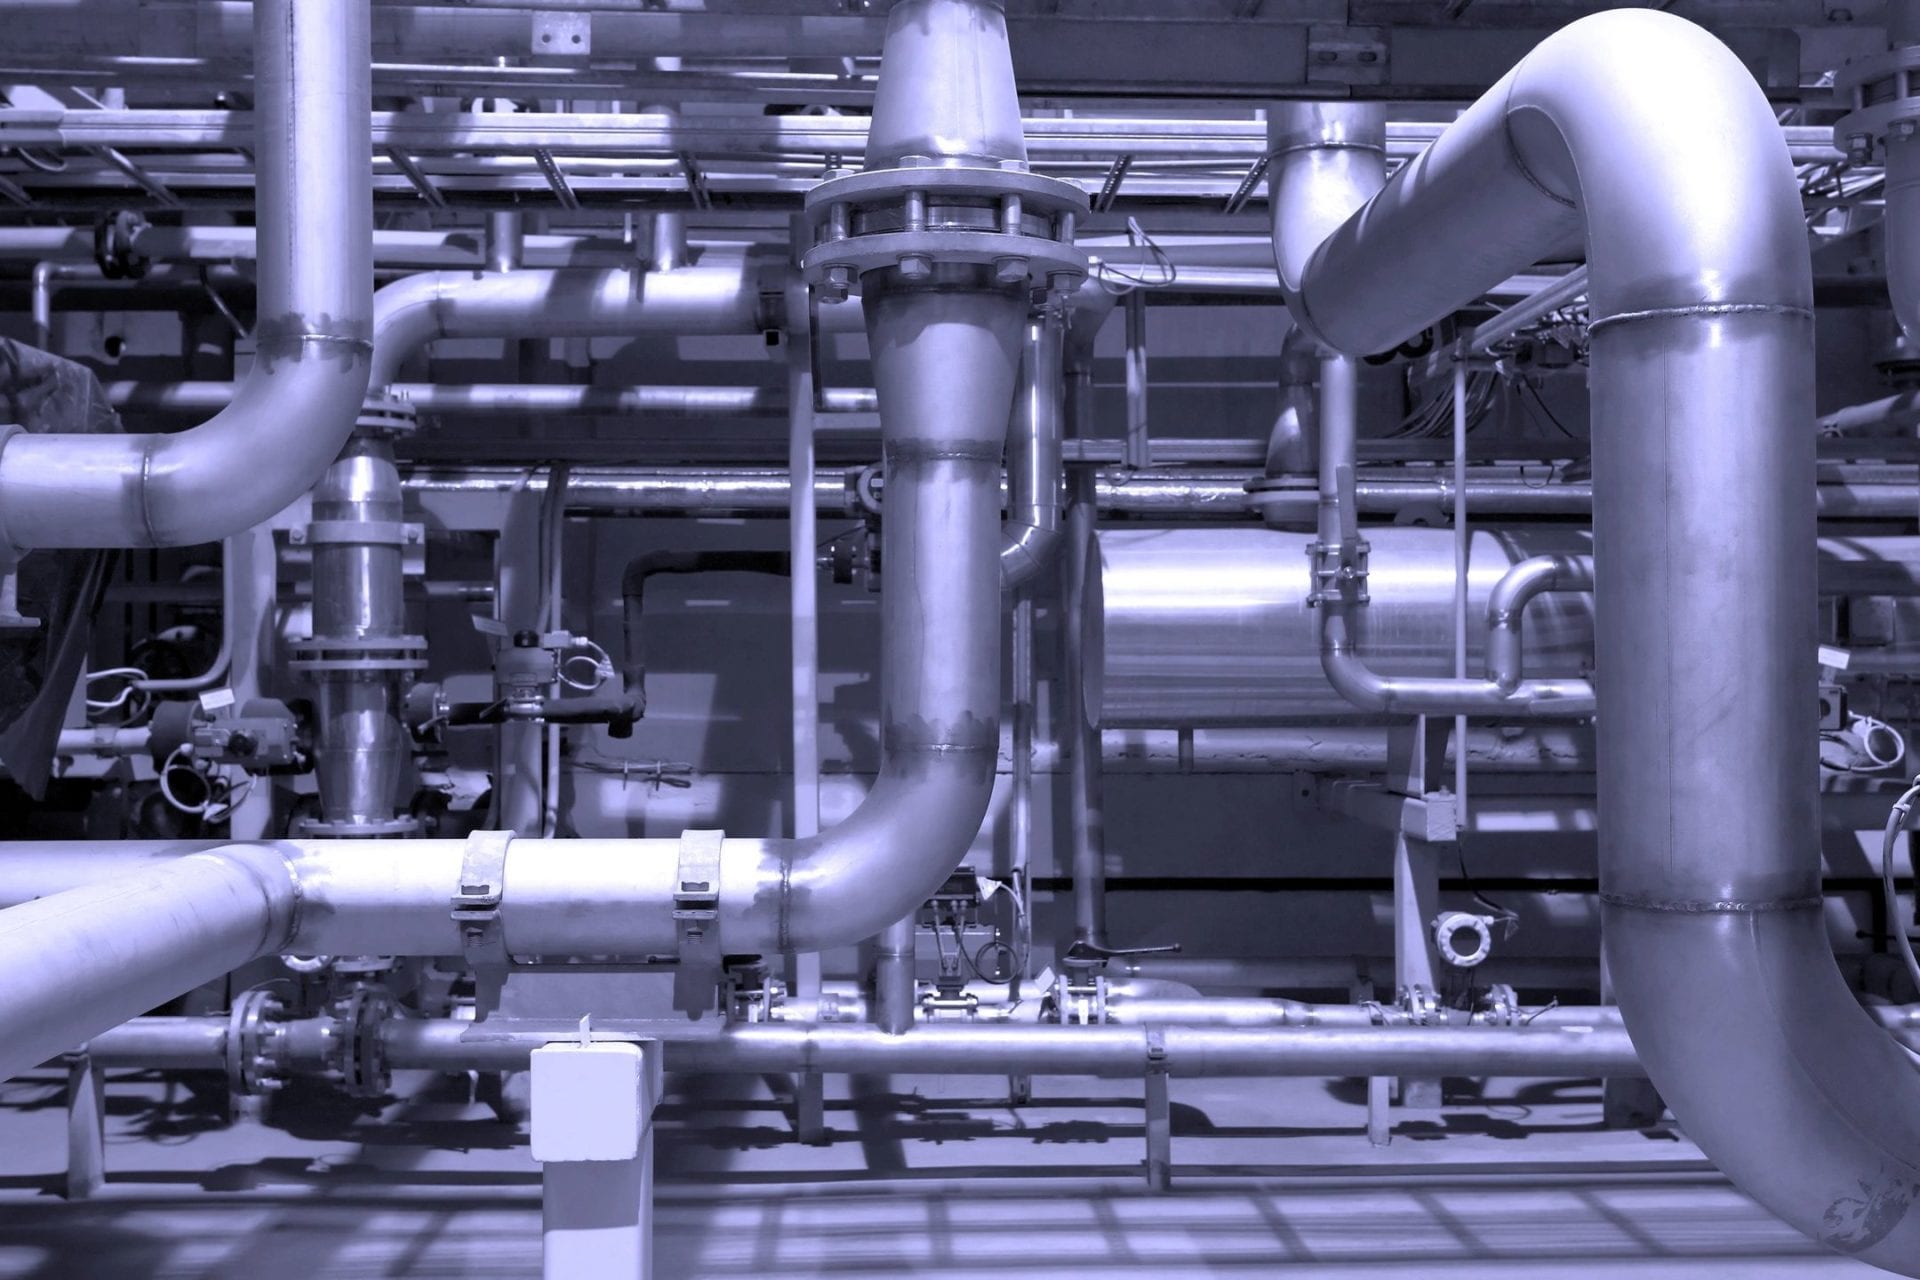 A large industrial area with pipes and valves.